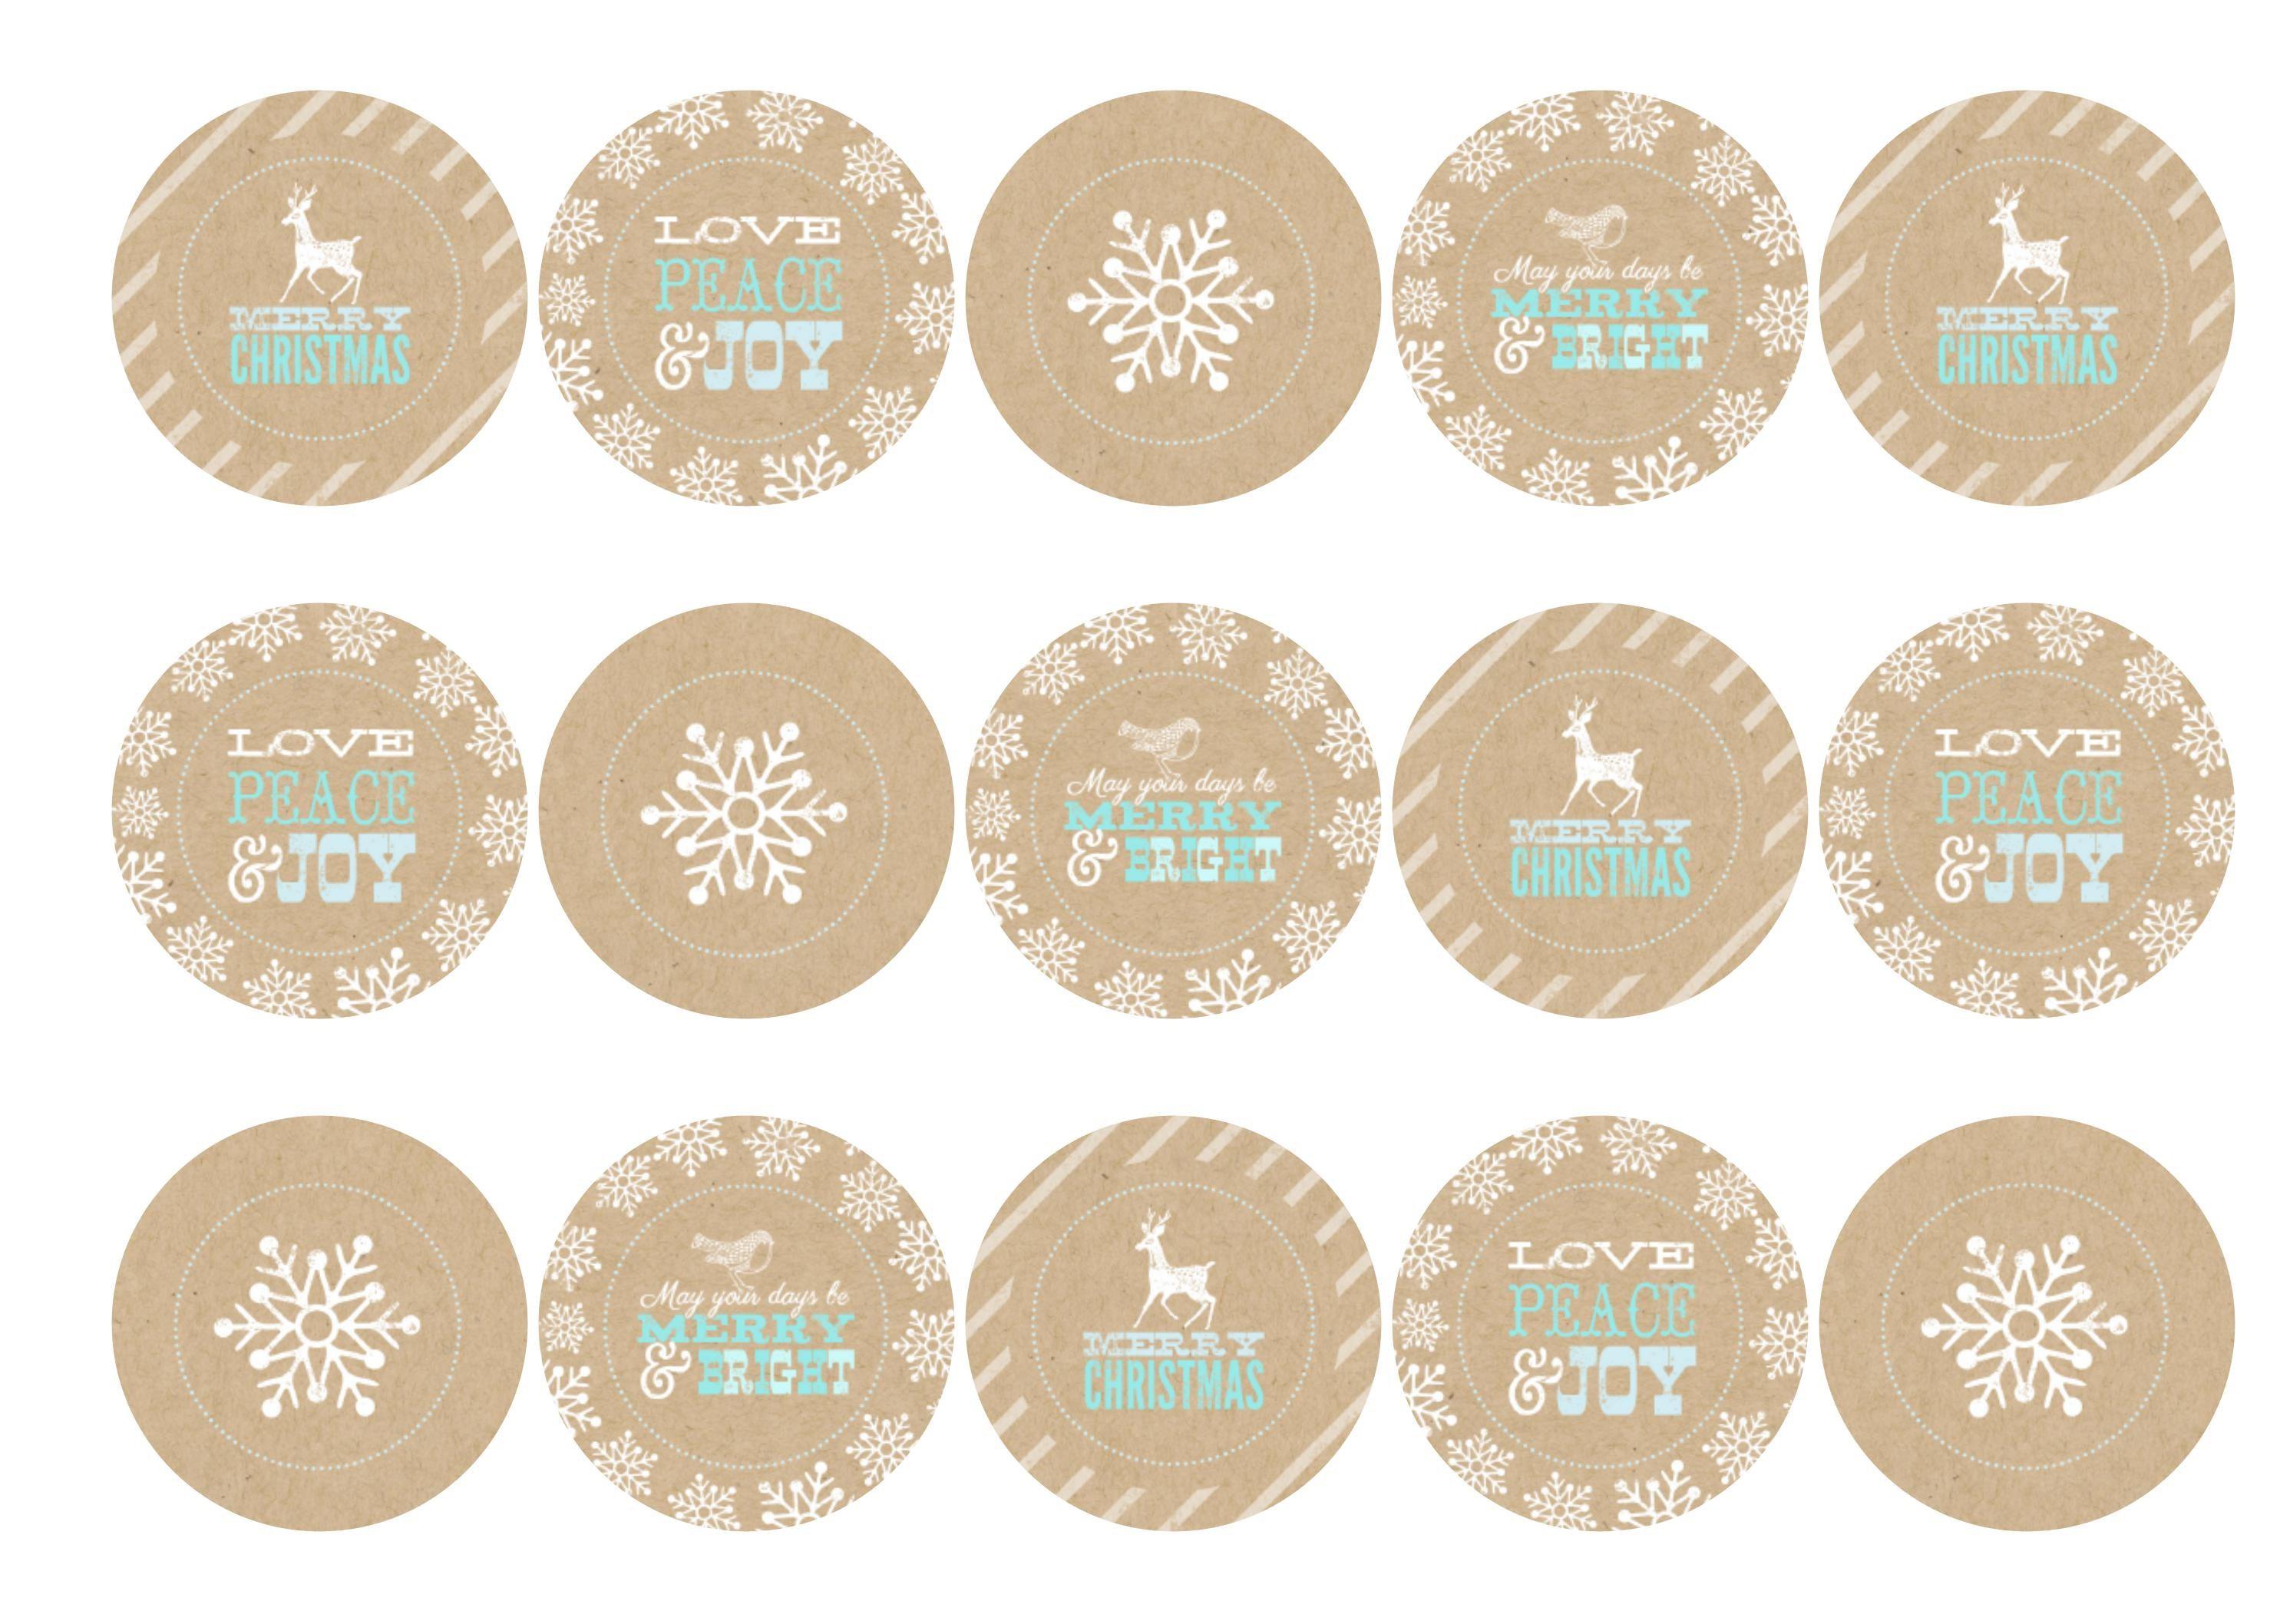 Printed cupcake toppers featuring Christmas designs in beige, white and blue